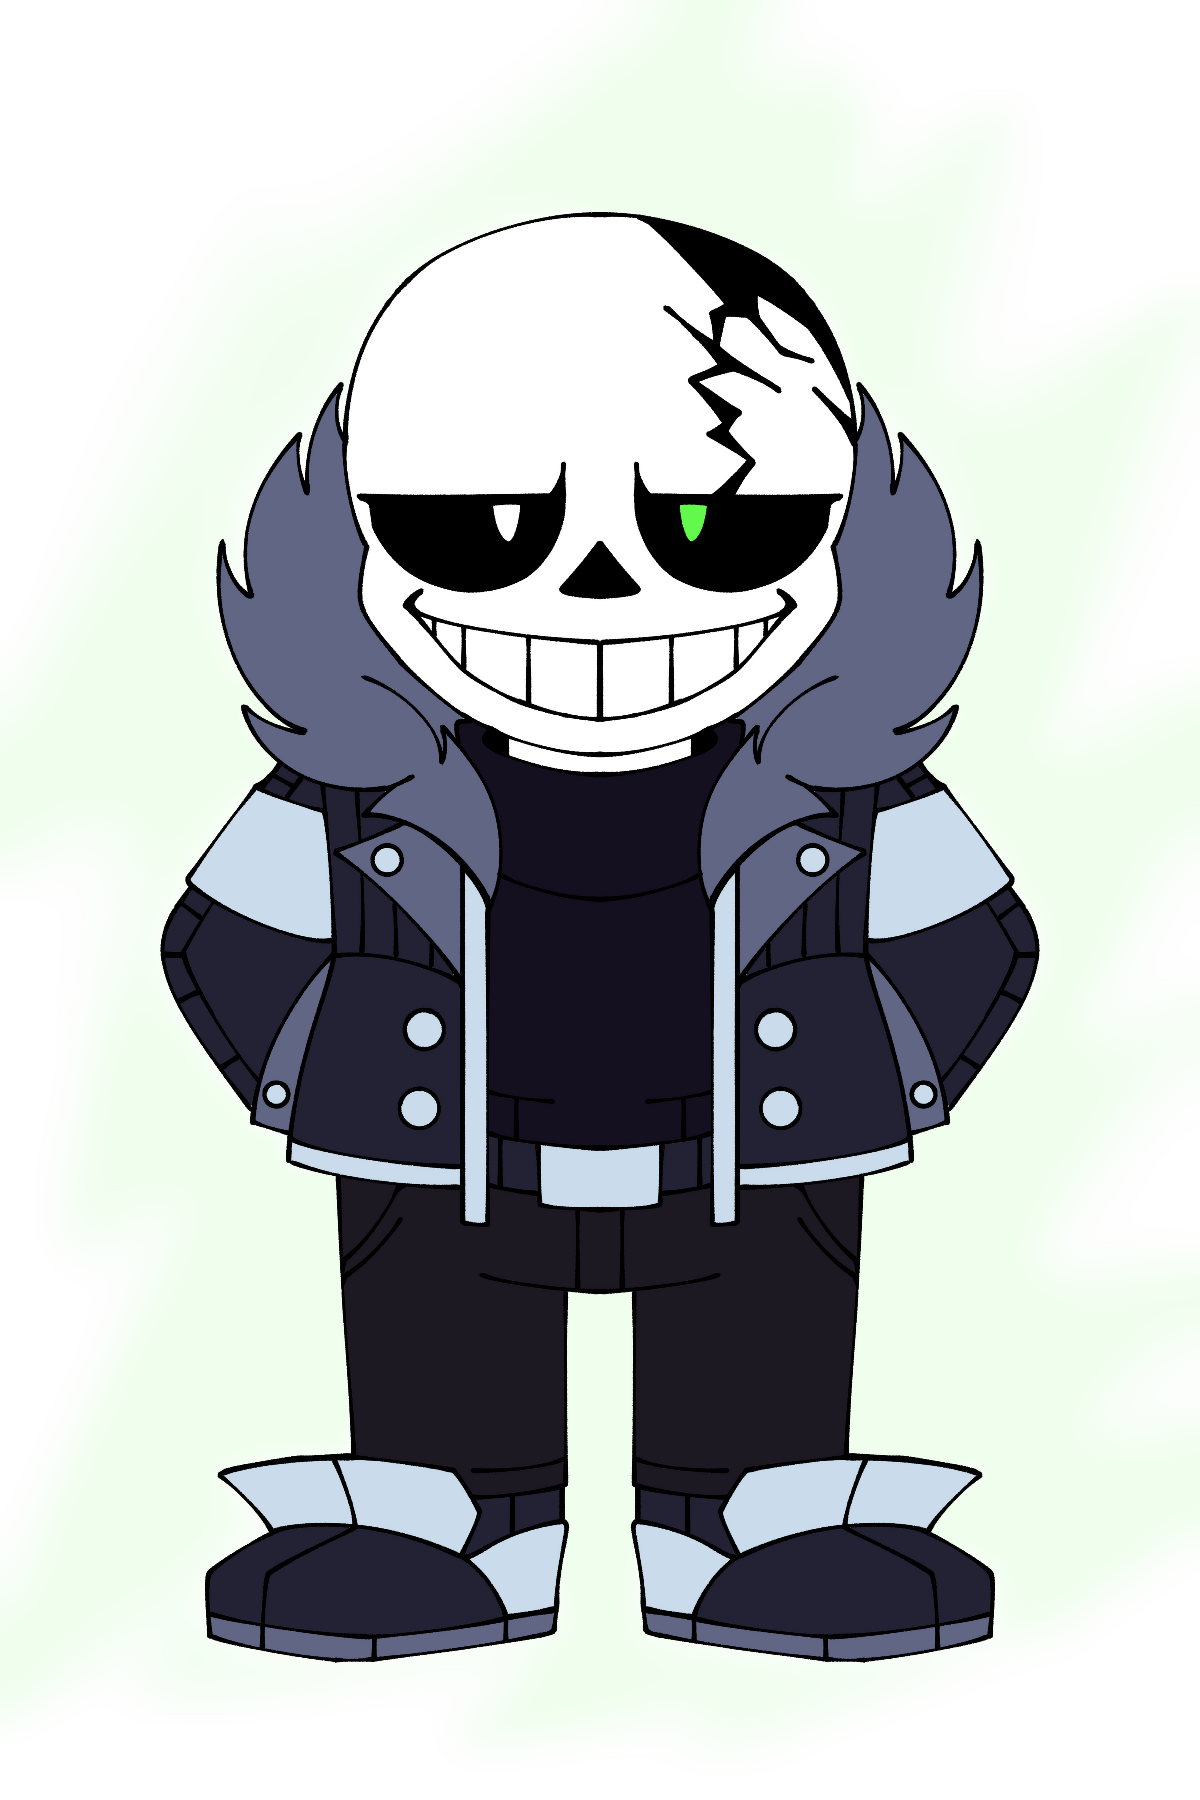 Just another Sans fight by Panthervention by Panthervention - Game